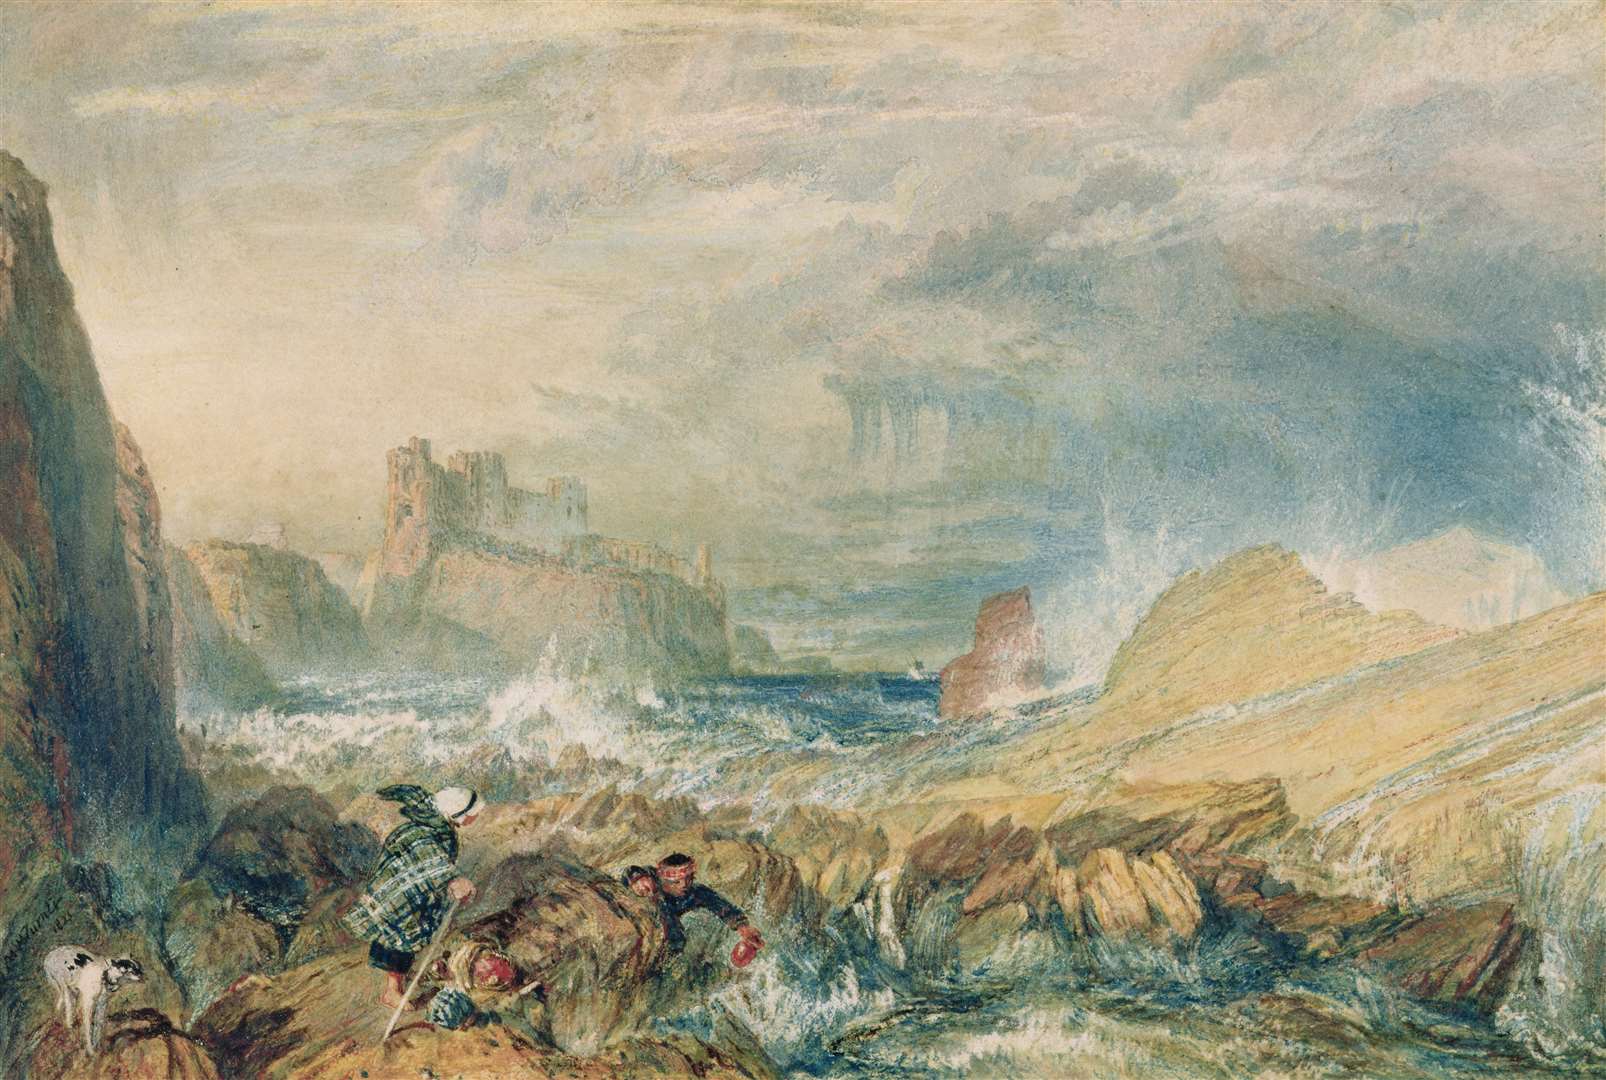 JMW Turner's Tantallon Castle, 1821, which was on display at the gallery